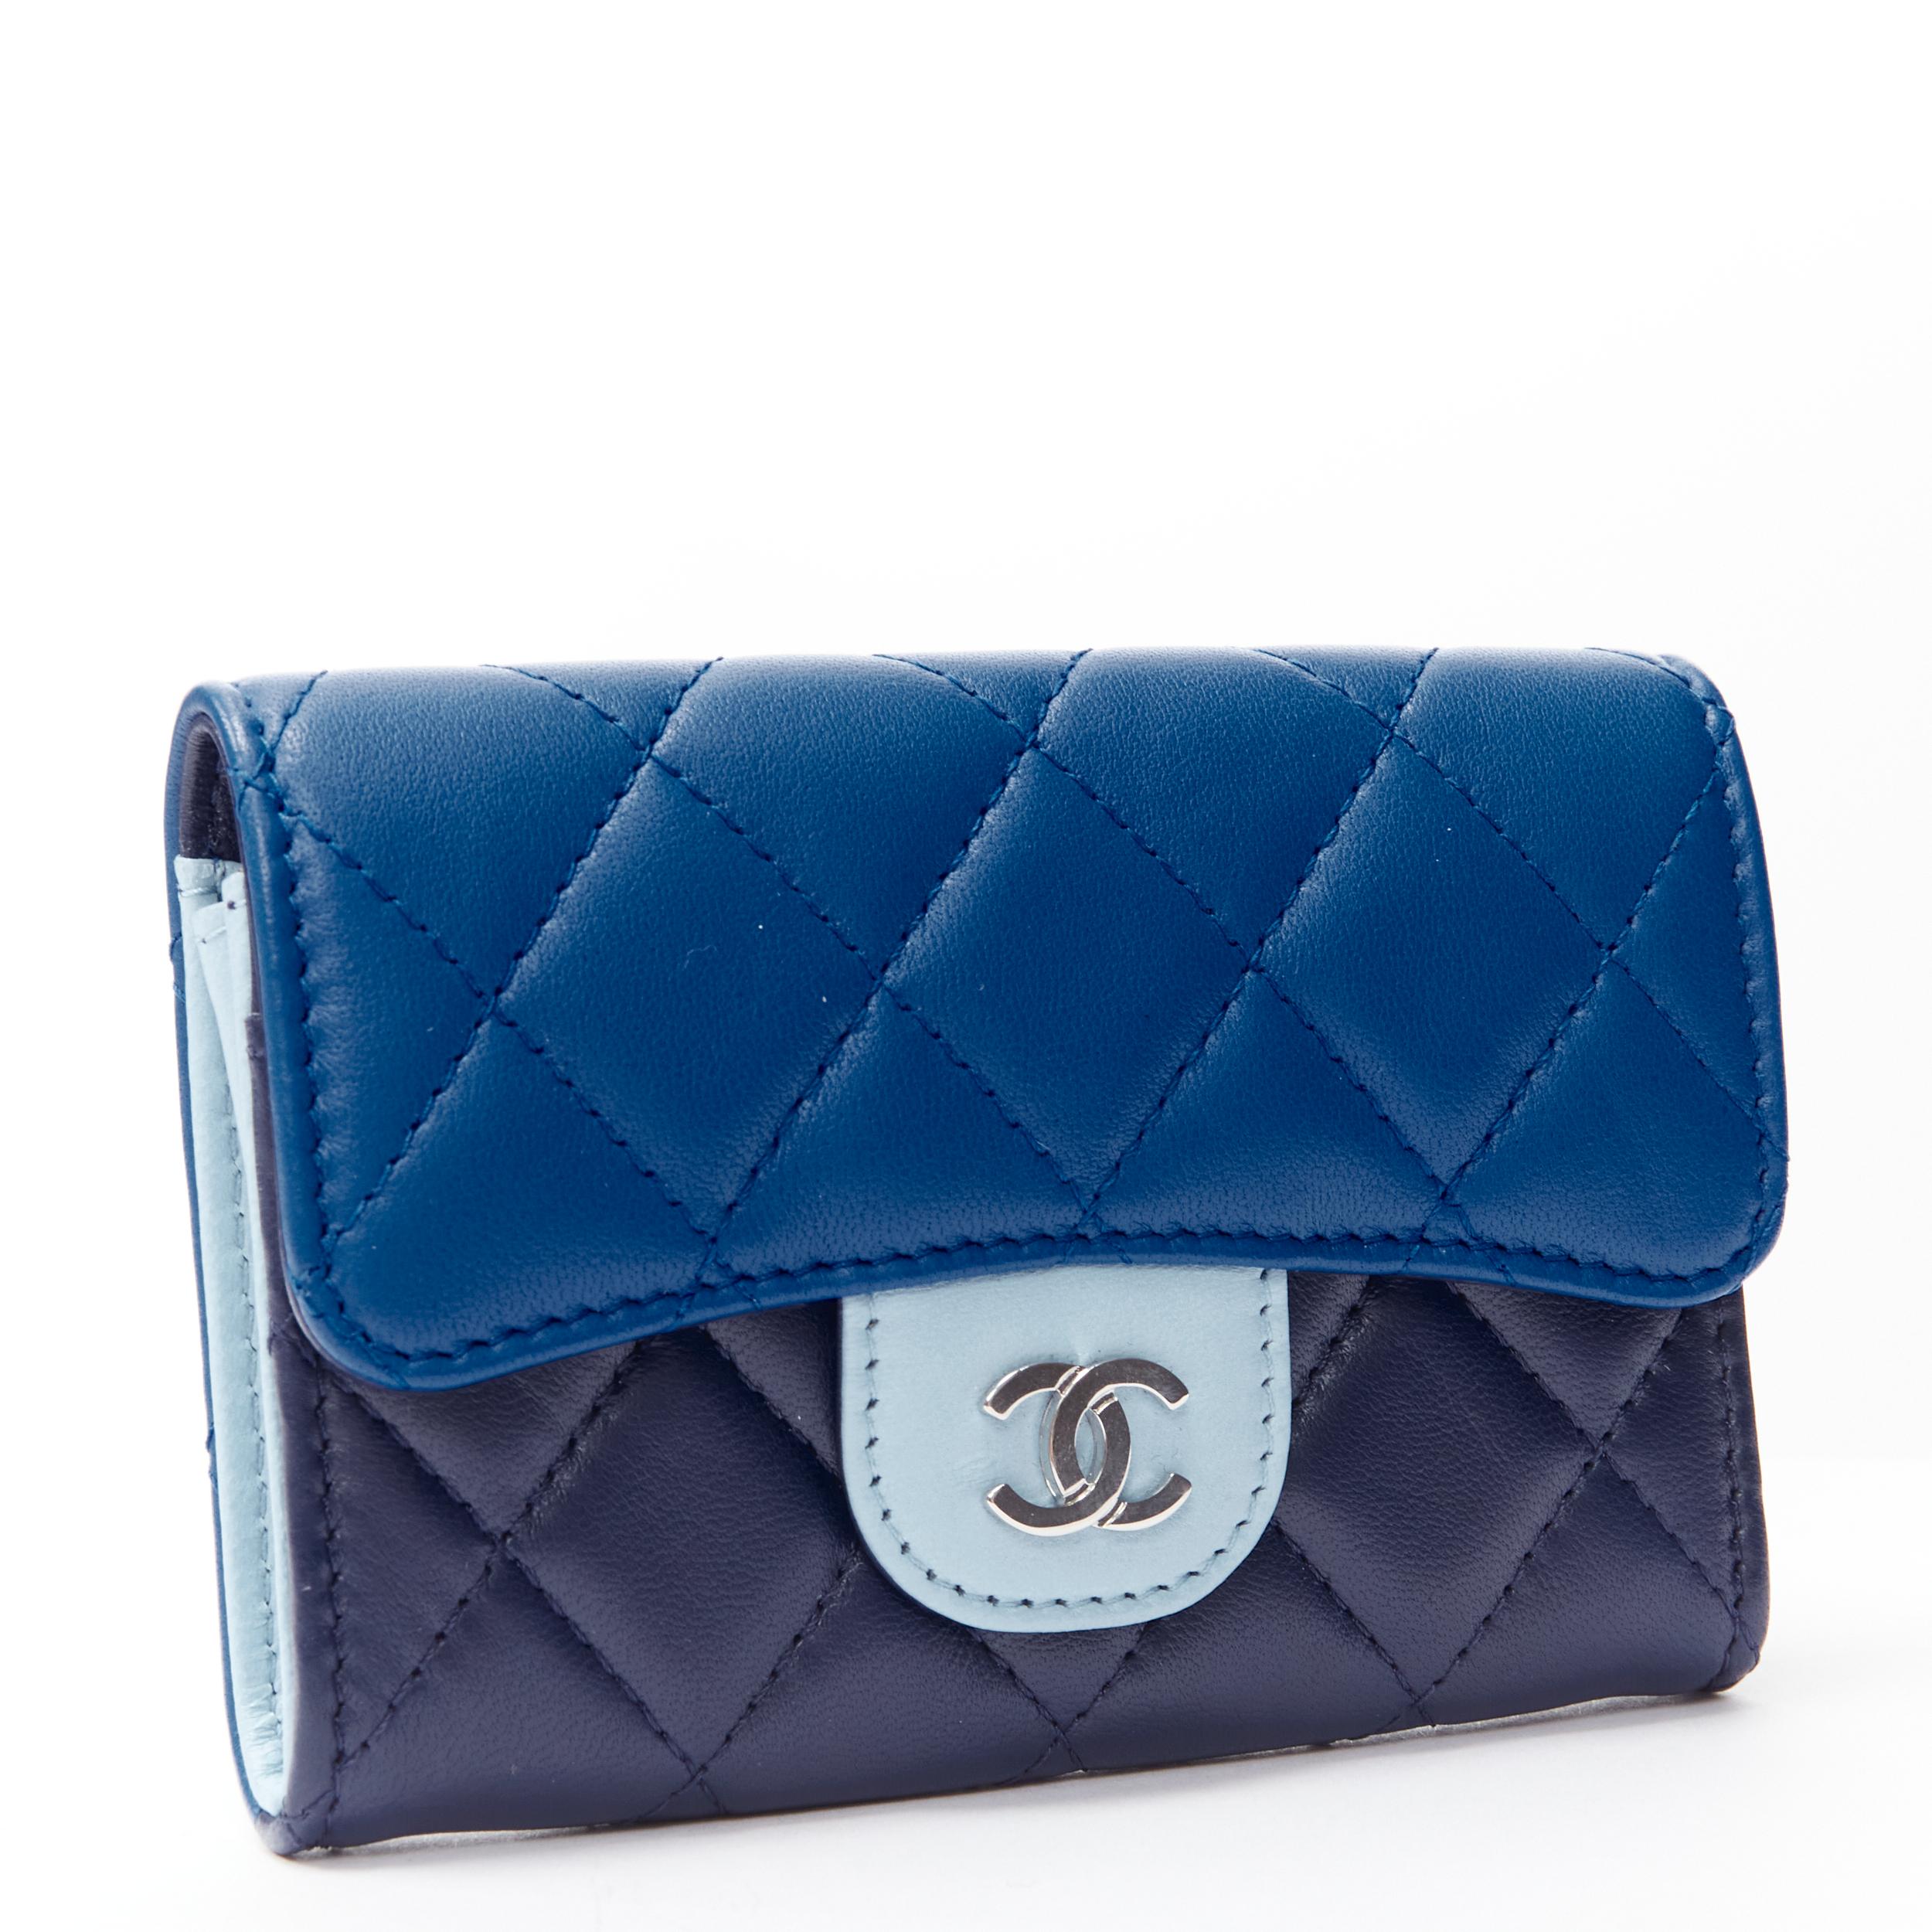 CHANEL blue tricolor lambskin diamond quilted leather CC flap PHW cardholder 
Reference: MELK/A00178 
Brand: Chanel 
Material: Leather 
Color: Blue 
Pattern: Solid 
Closure: Button 
Made in: Italy 

CONDITION: 
Condition: Excellent, this item was